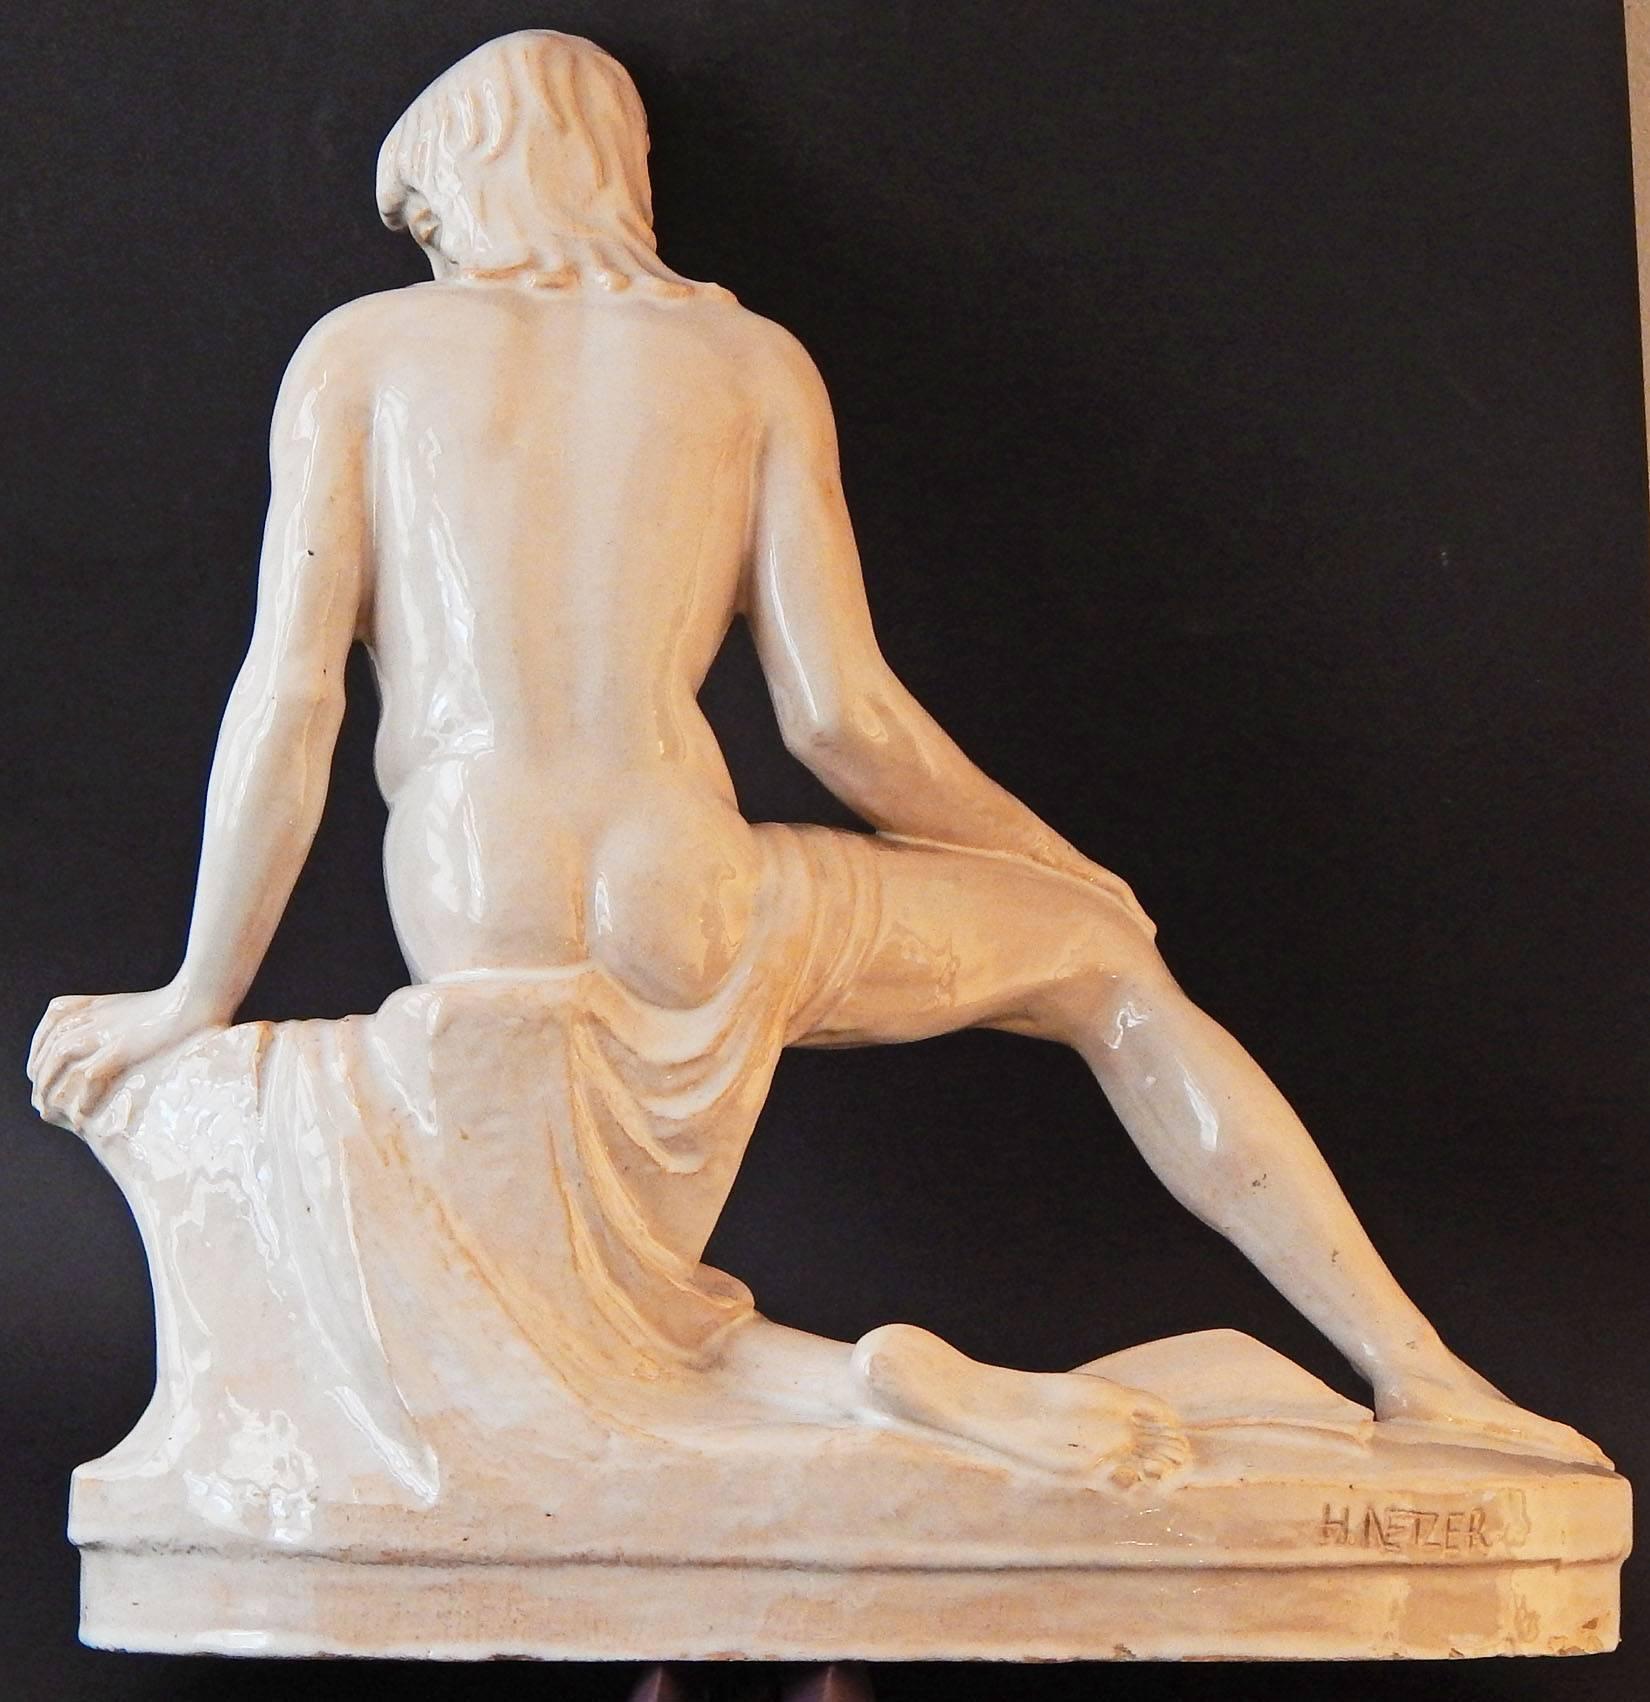 This unique sculpture -- carved and shaped in a reddish clay, not molded -- depicts a slender nude youth, leaning on a tree stump and looking pensively to one side. The sculpture is bathed in a lovely semi-opaque white glaze, allowing hints of the